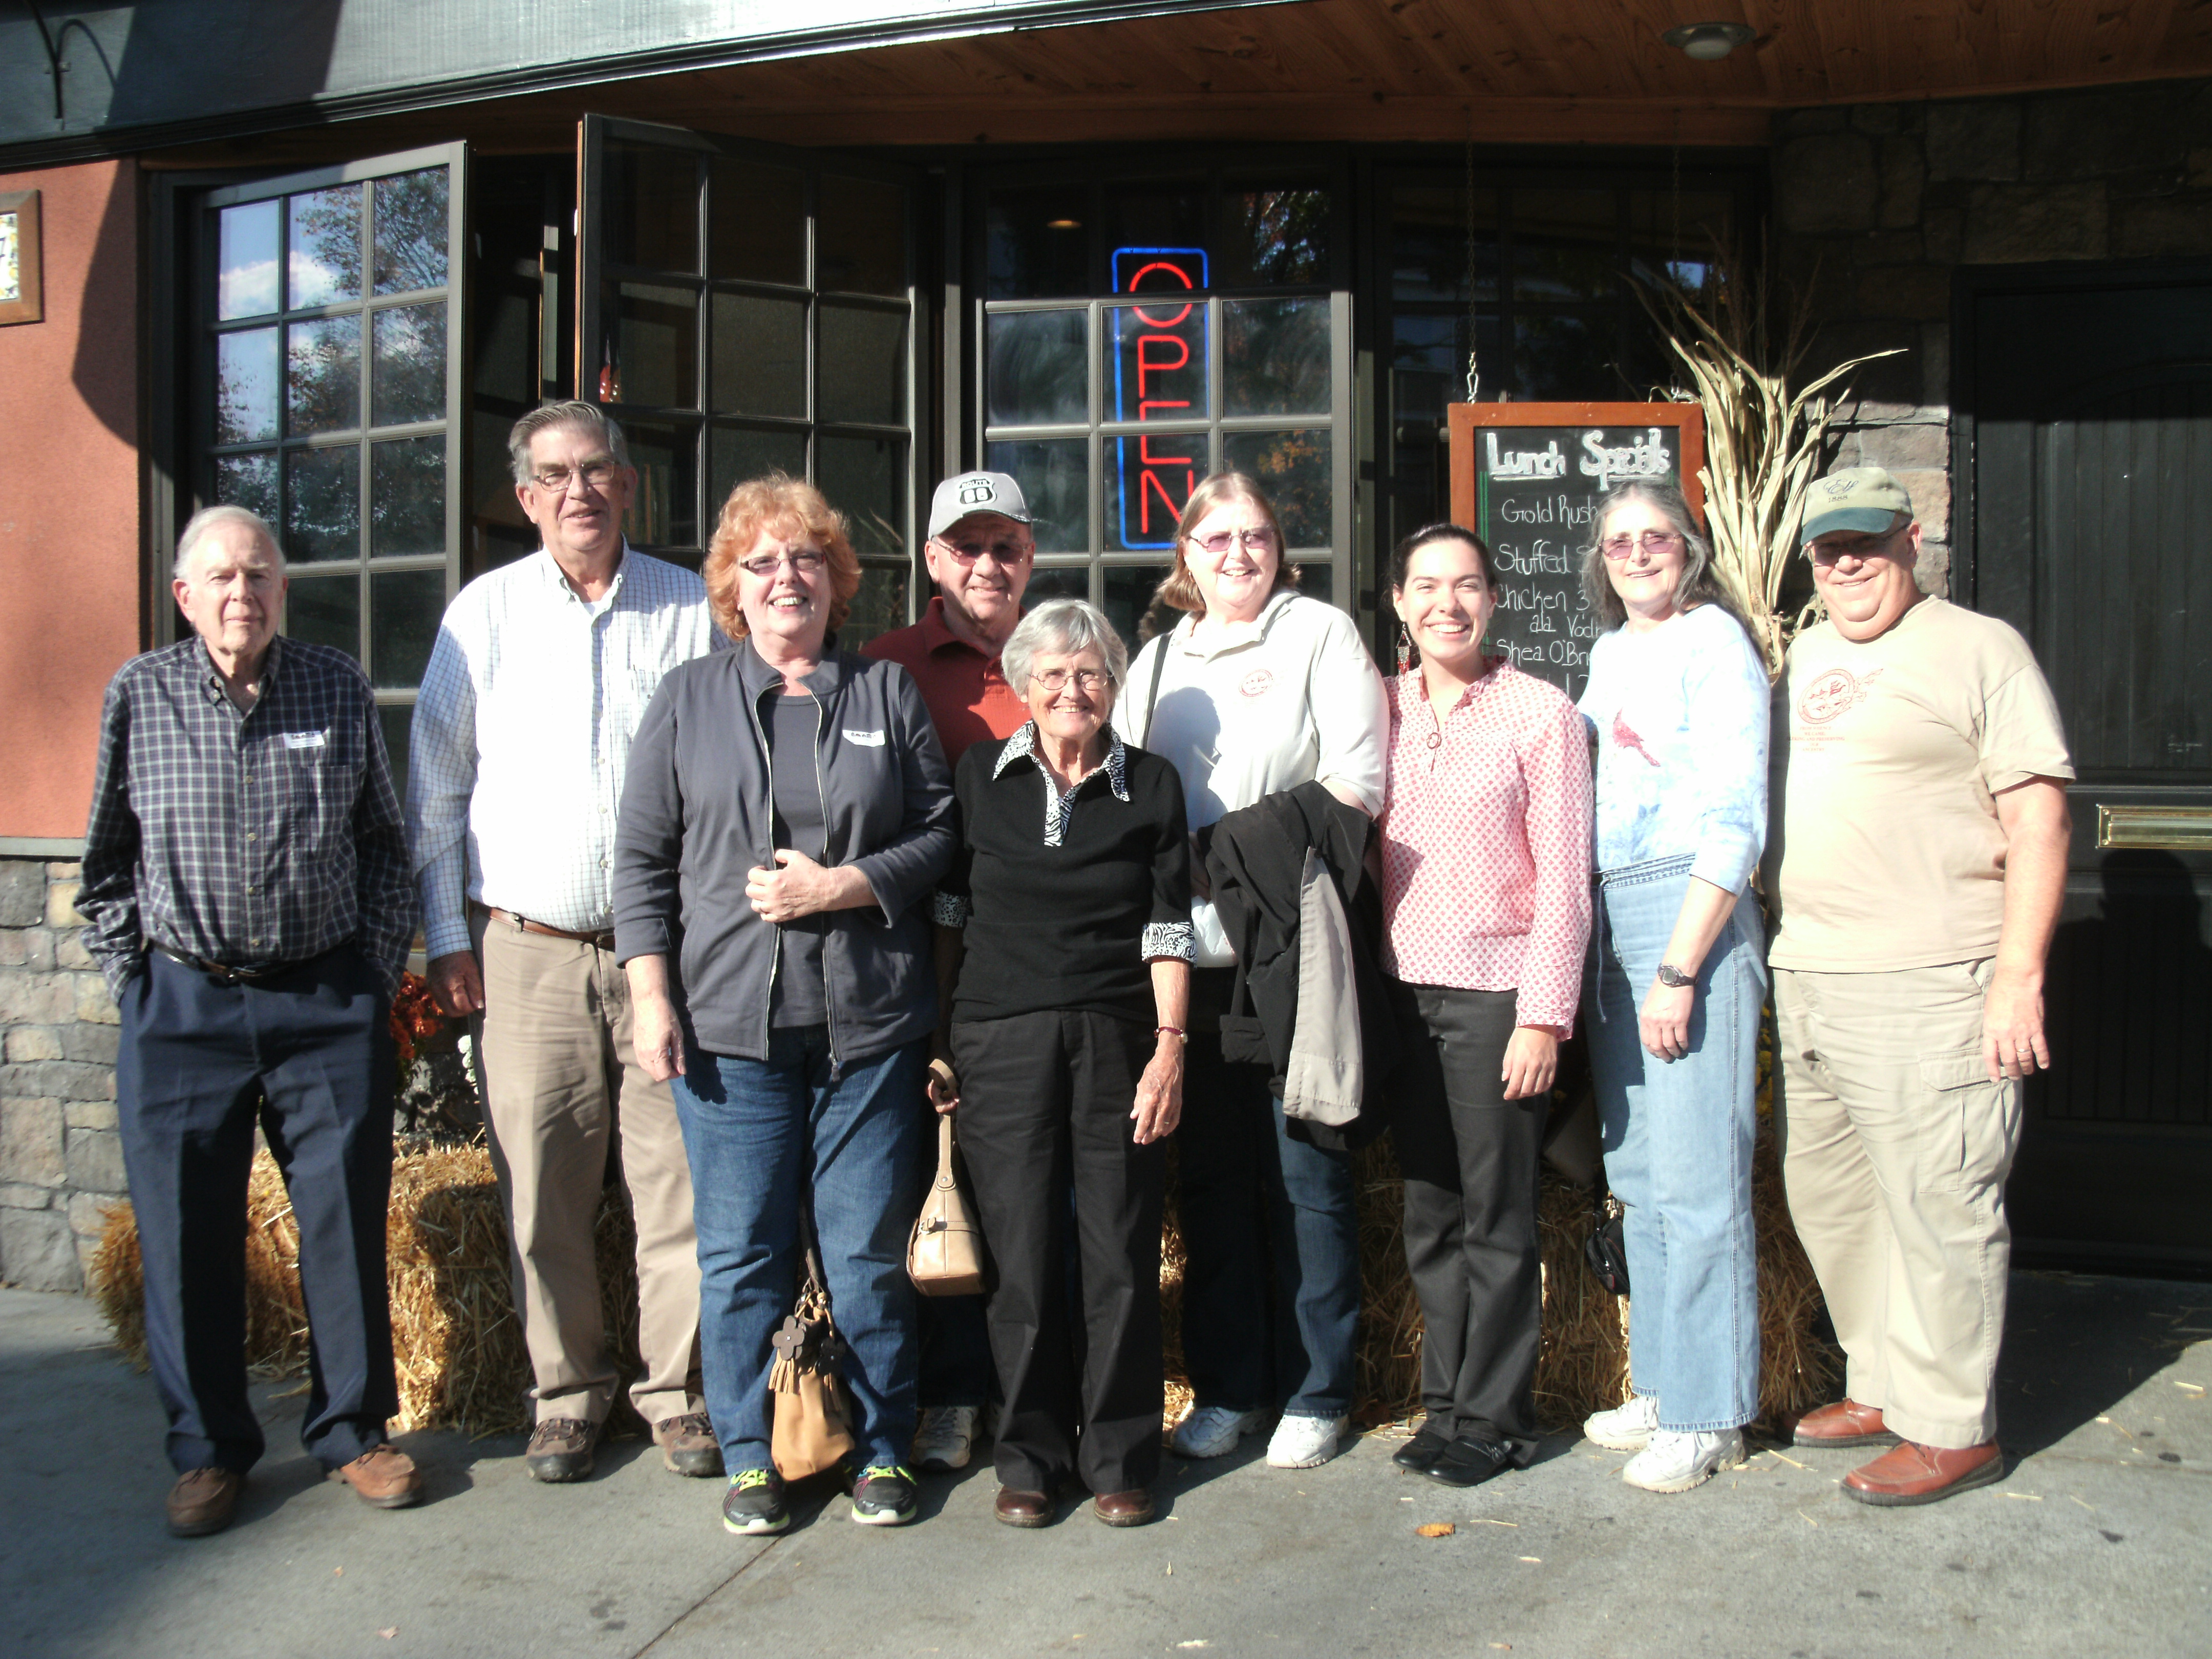 A group from the Genealogical Society of Salem poses during their trip to New Paltz, New York